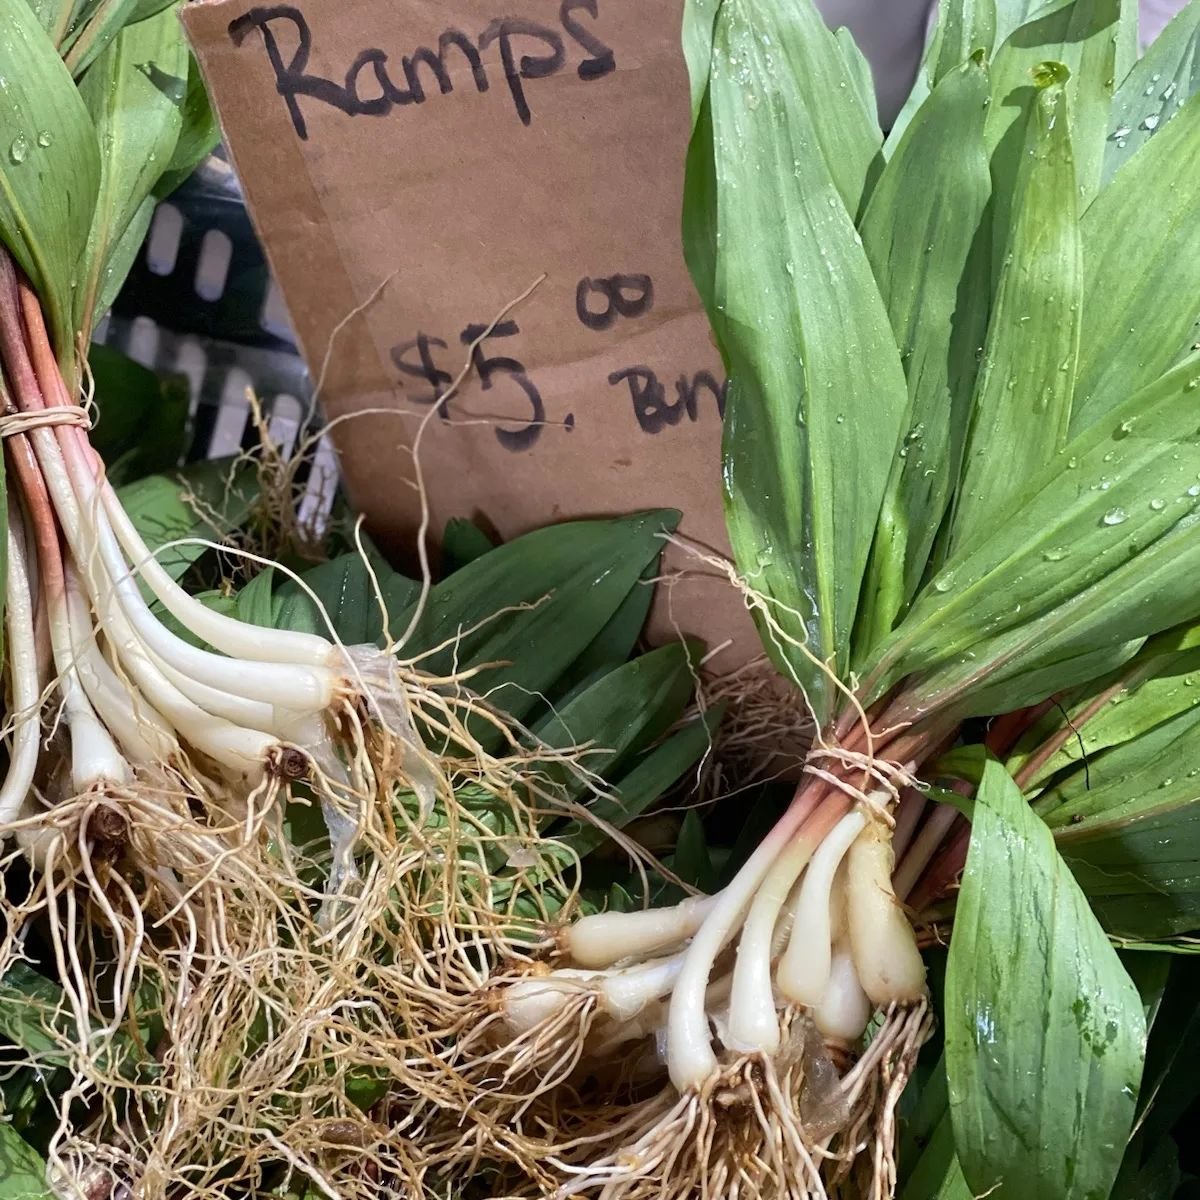 Ramps at the Market today! Add a delicious sign of spring to your next meal.

#ramps #farmersmarket #wegootsego